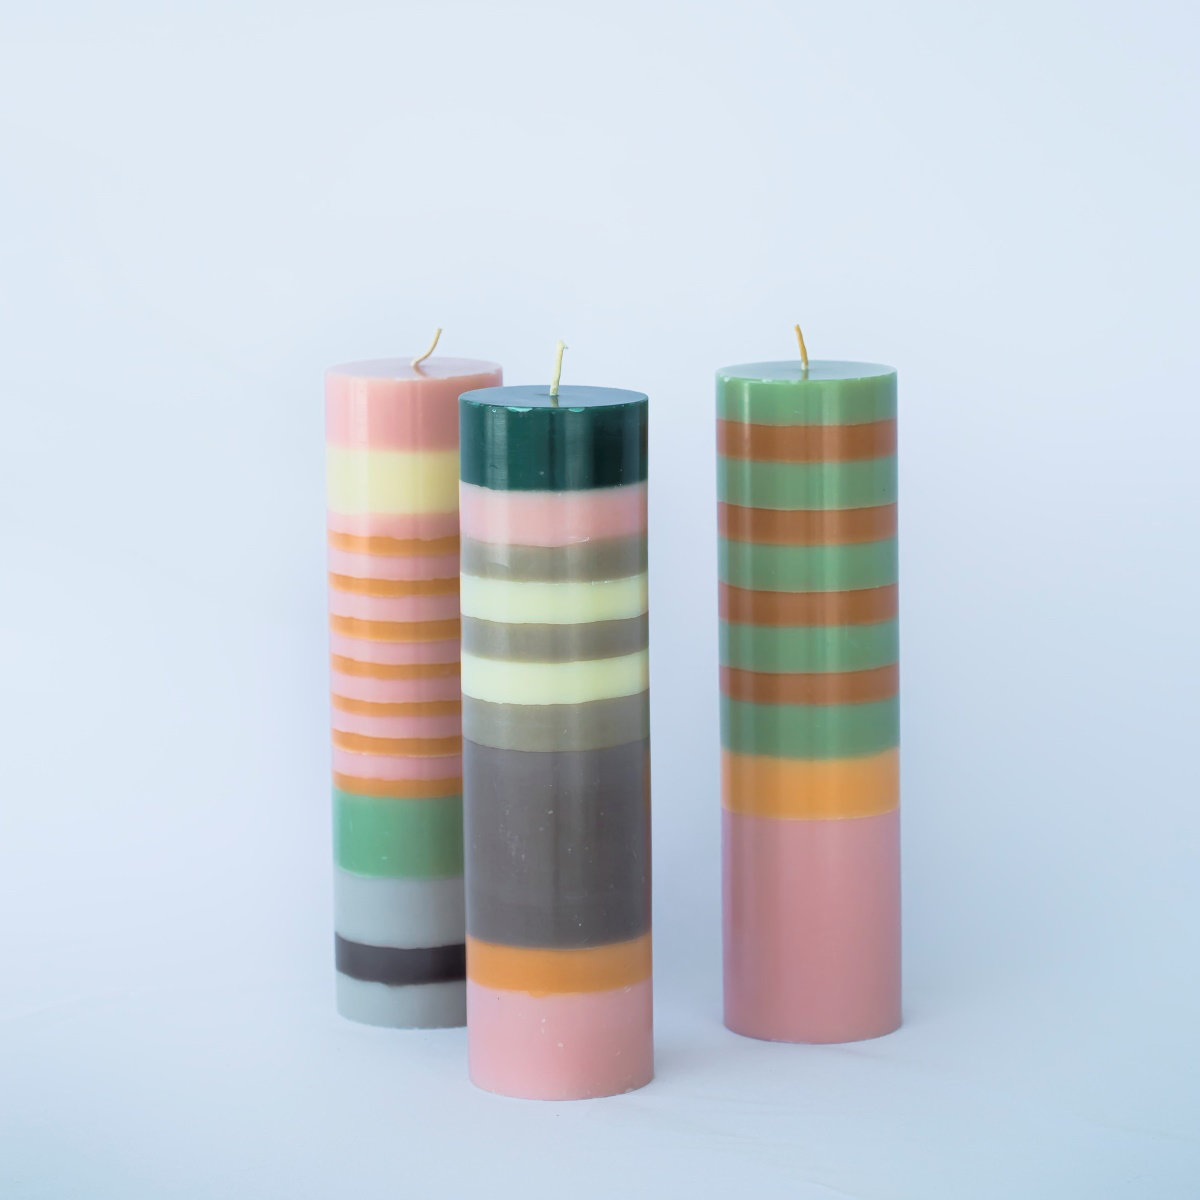 3 colourful, sustainable candles